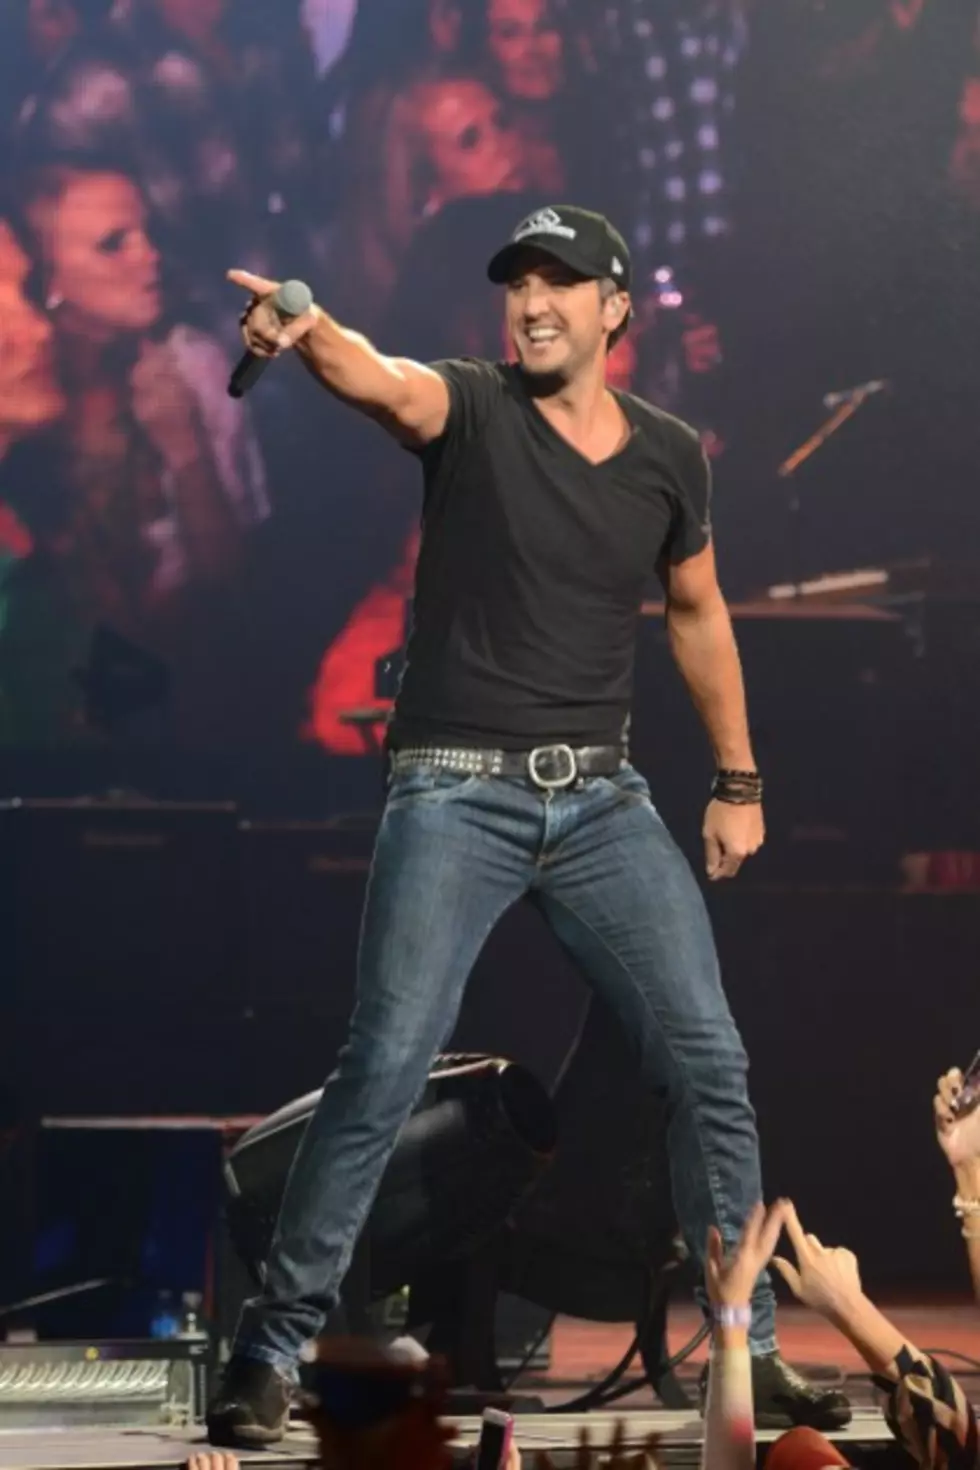 Luke Bryan Sells Out In Birmingham and Adds a Second Show